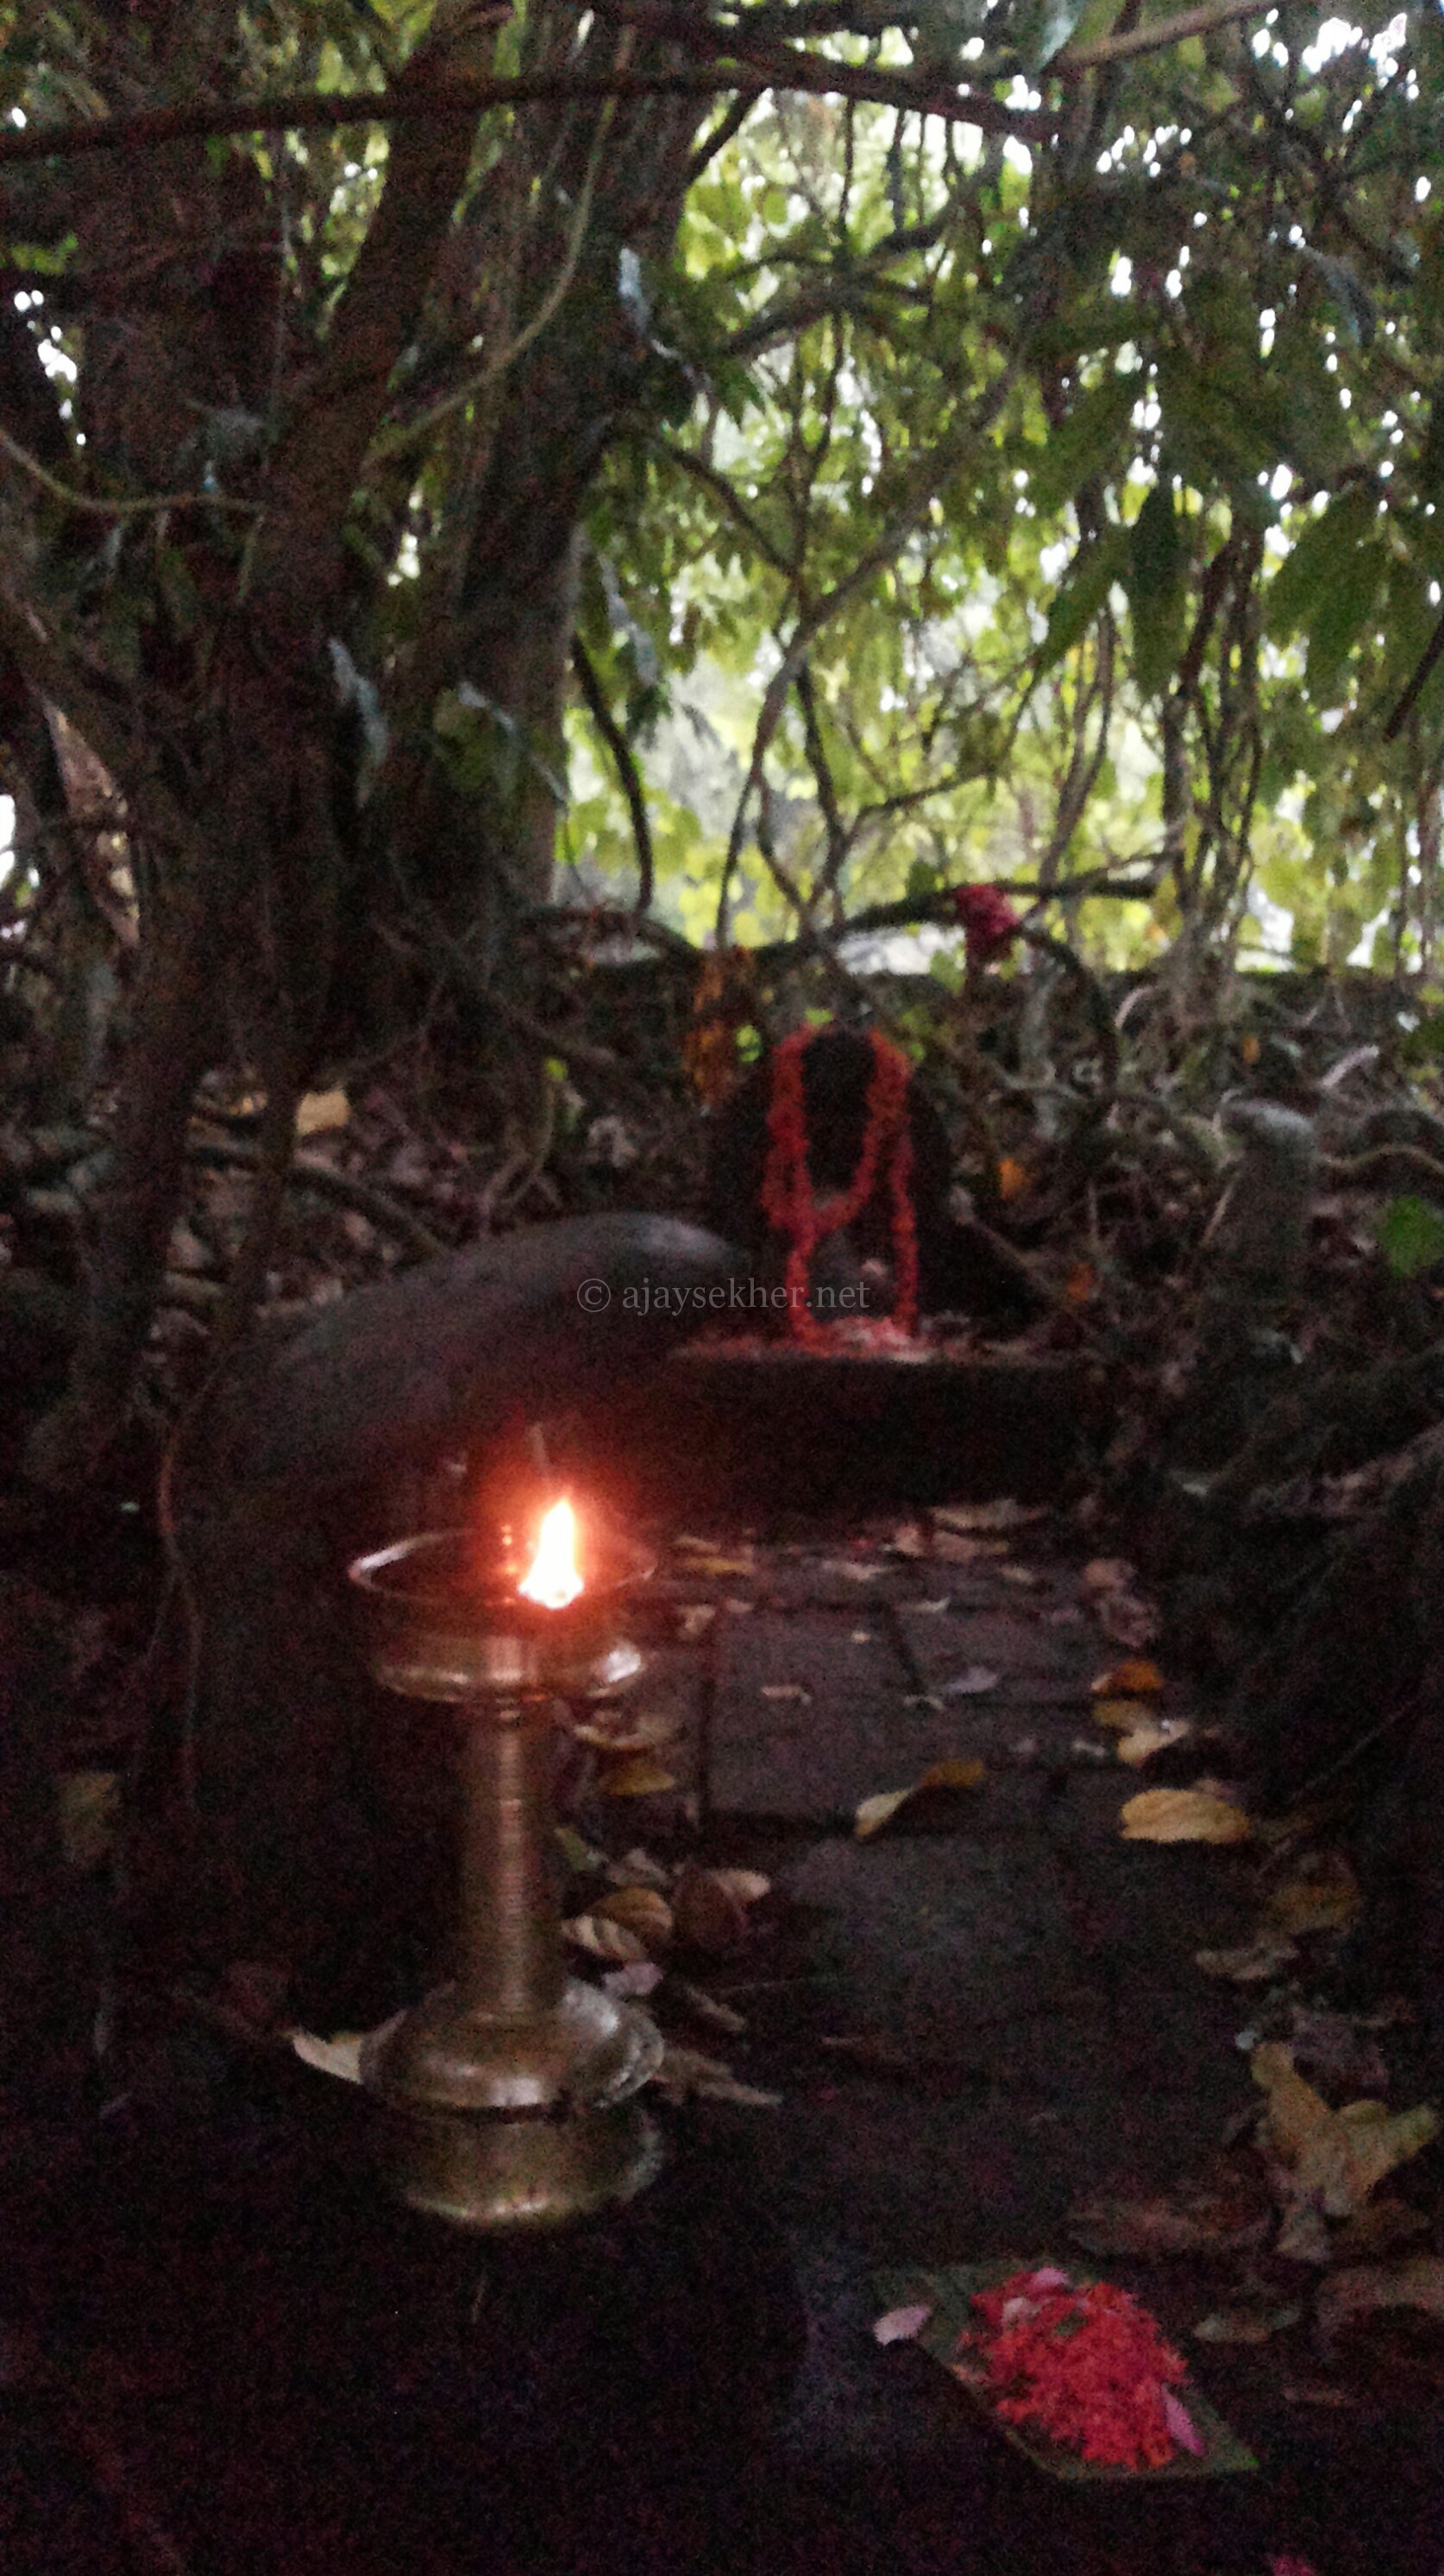 Panachikal Bhagavati at Vaikam temple. The Naga worship and sacred grove relics are also reminiscent of Buddhism and its conservationist ethical culture in Kerala. Kavu or sacred grove itself is named after Kanyakavu the Buddhist nun, who nurtured the grove and sheltered the snakes, reptiles, birds and other animals as a practice of compassion and Maitri.